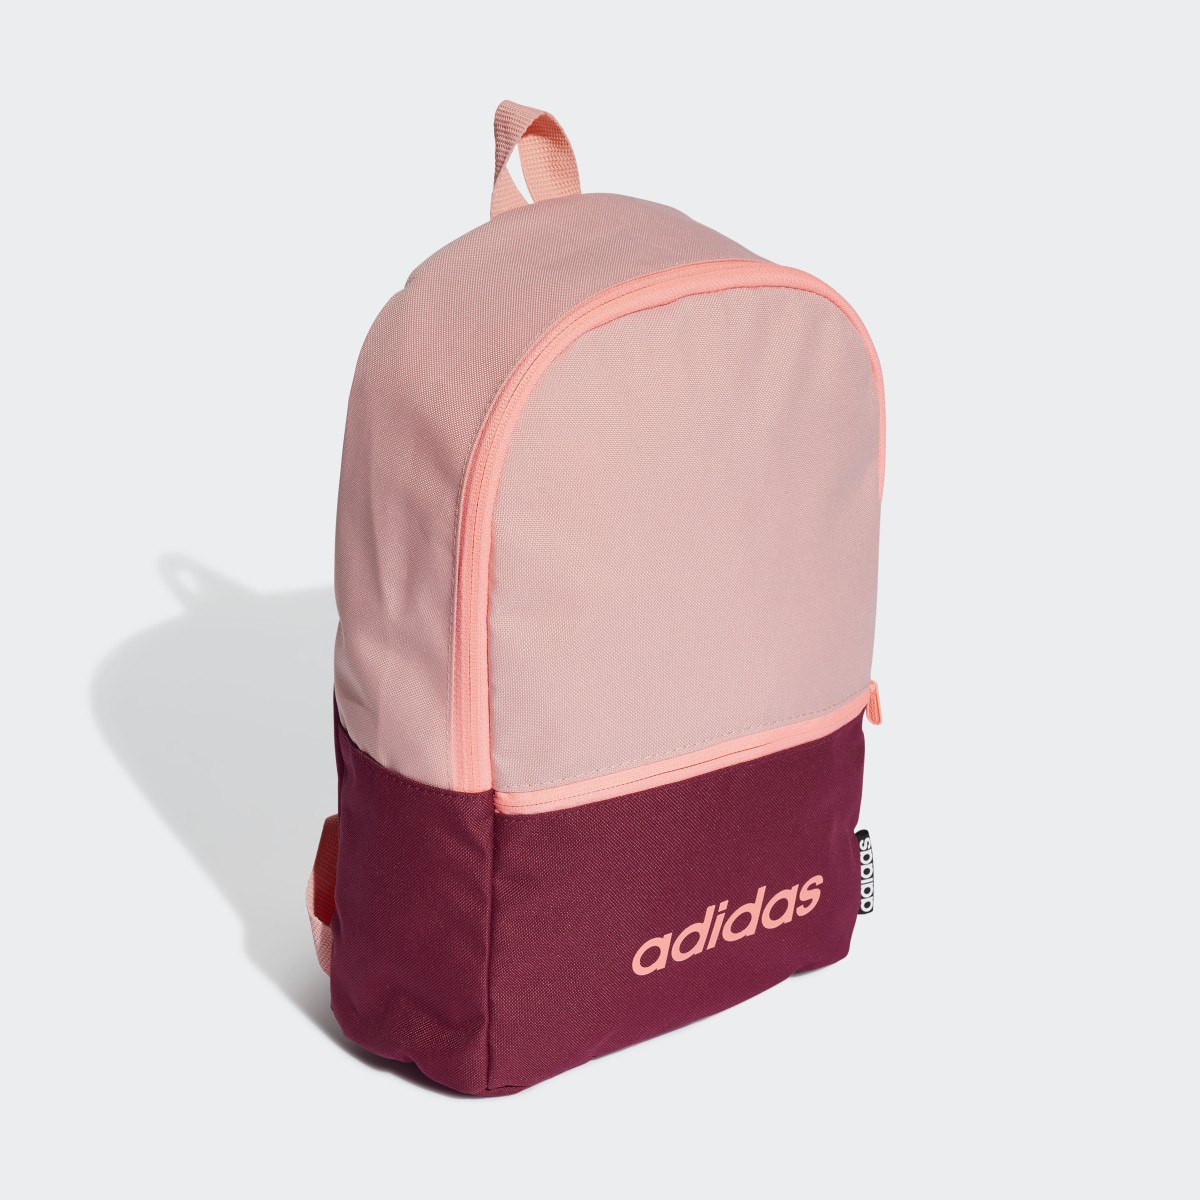 Adidas Classic Backpack. 4